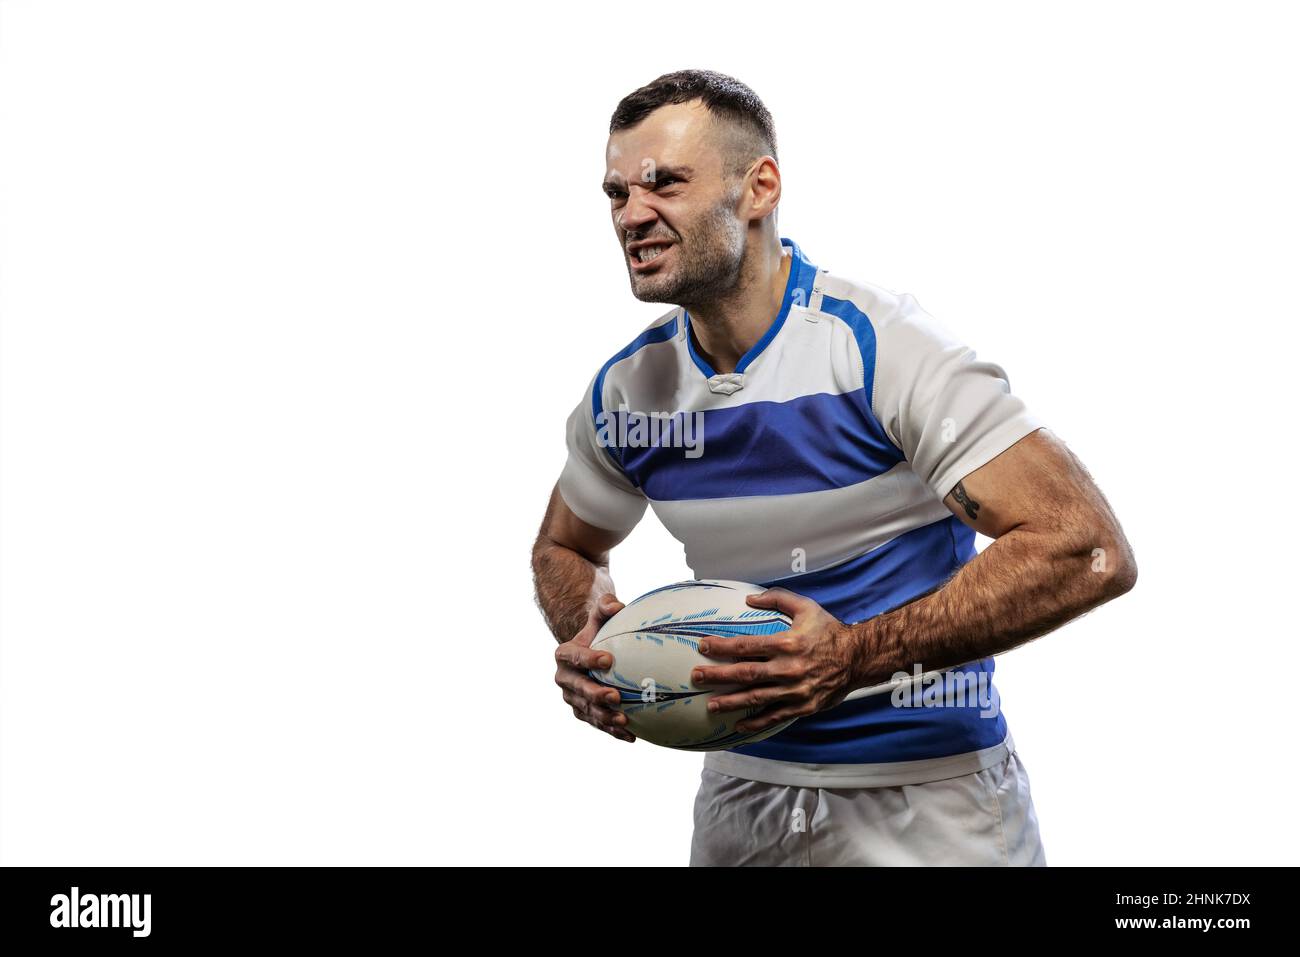 Portrait of serious man, rugby player posing with ball isolated on white background. Concept of action, motion, sport, hobby, ahievements Stock Photo